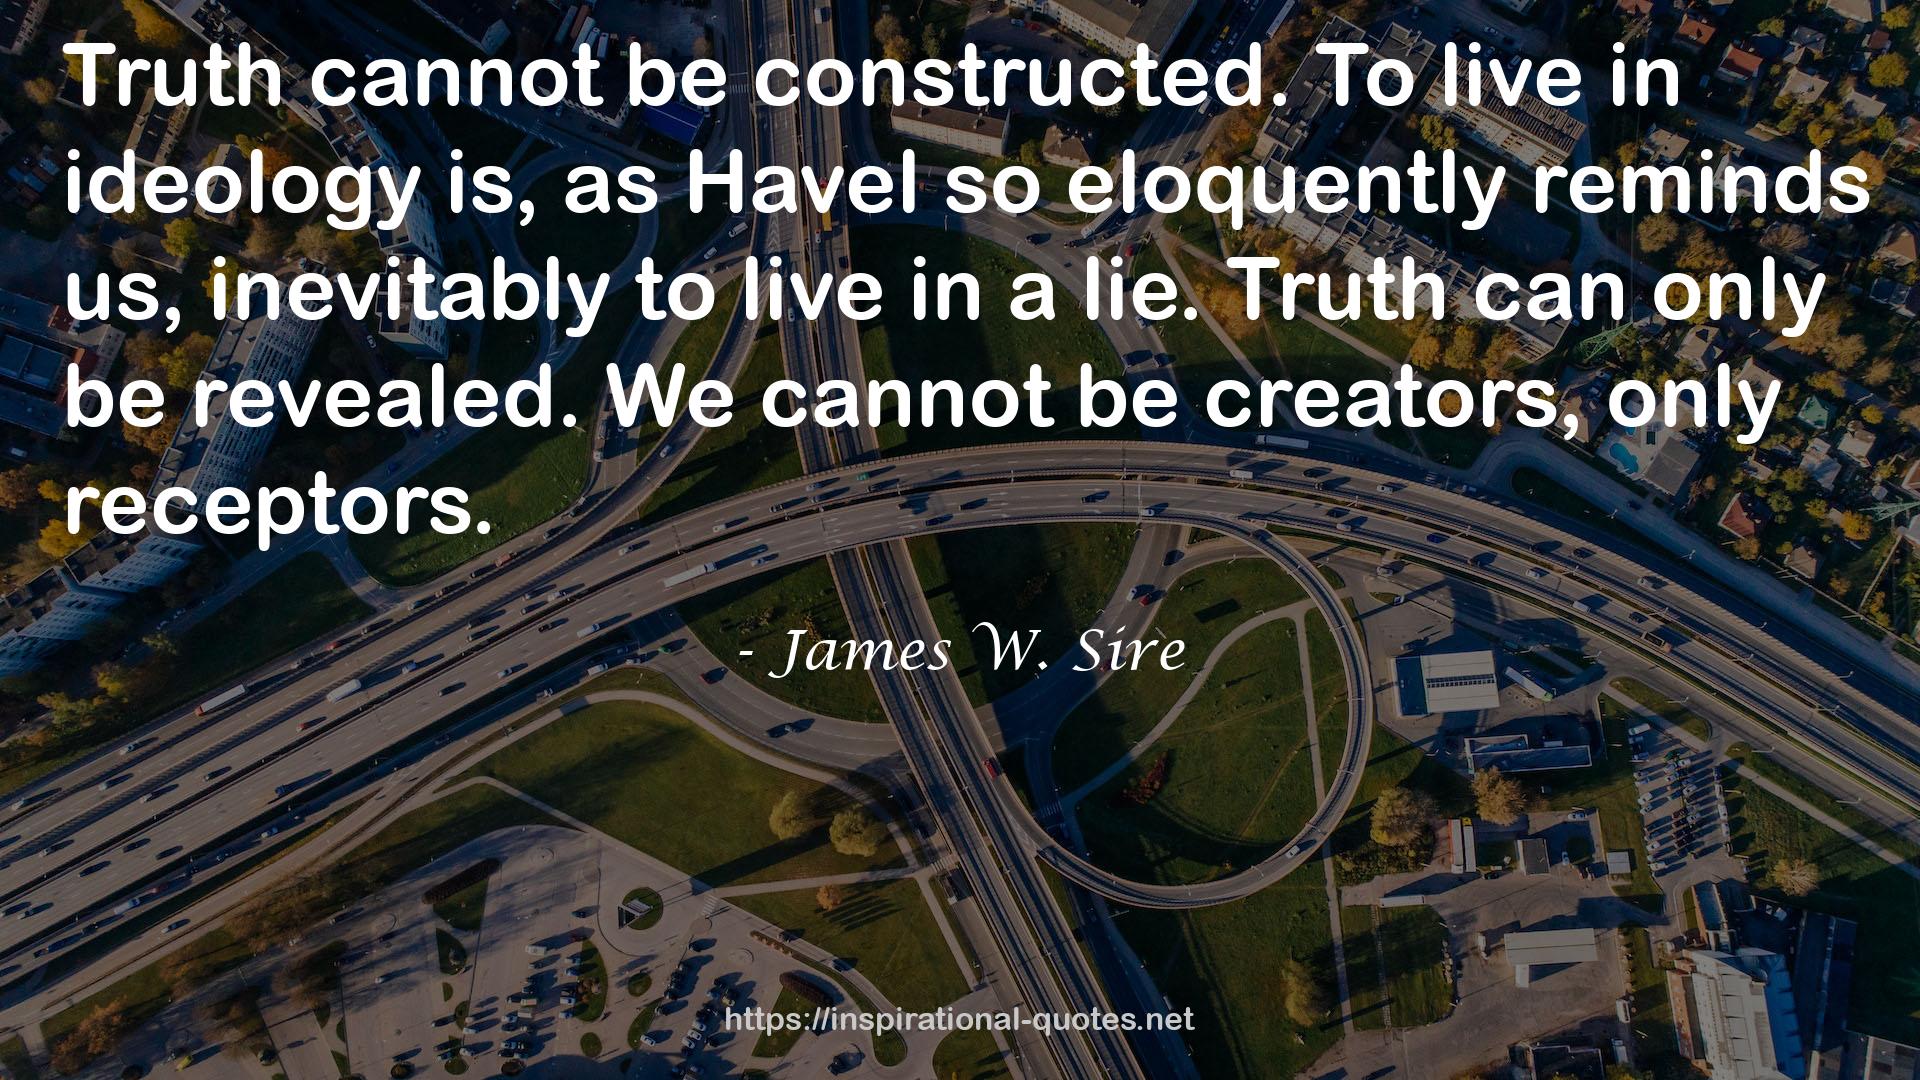 James W. Sire QUOTES